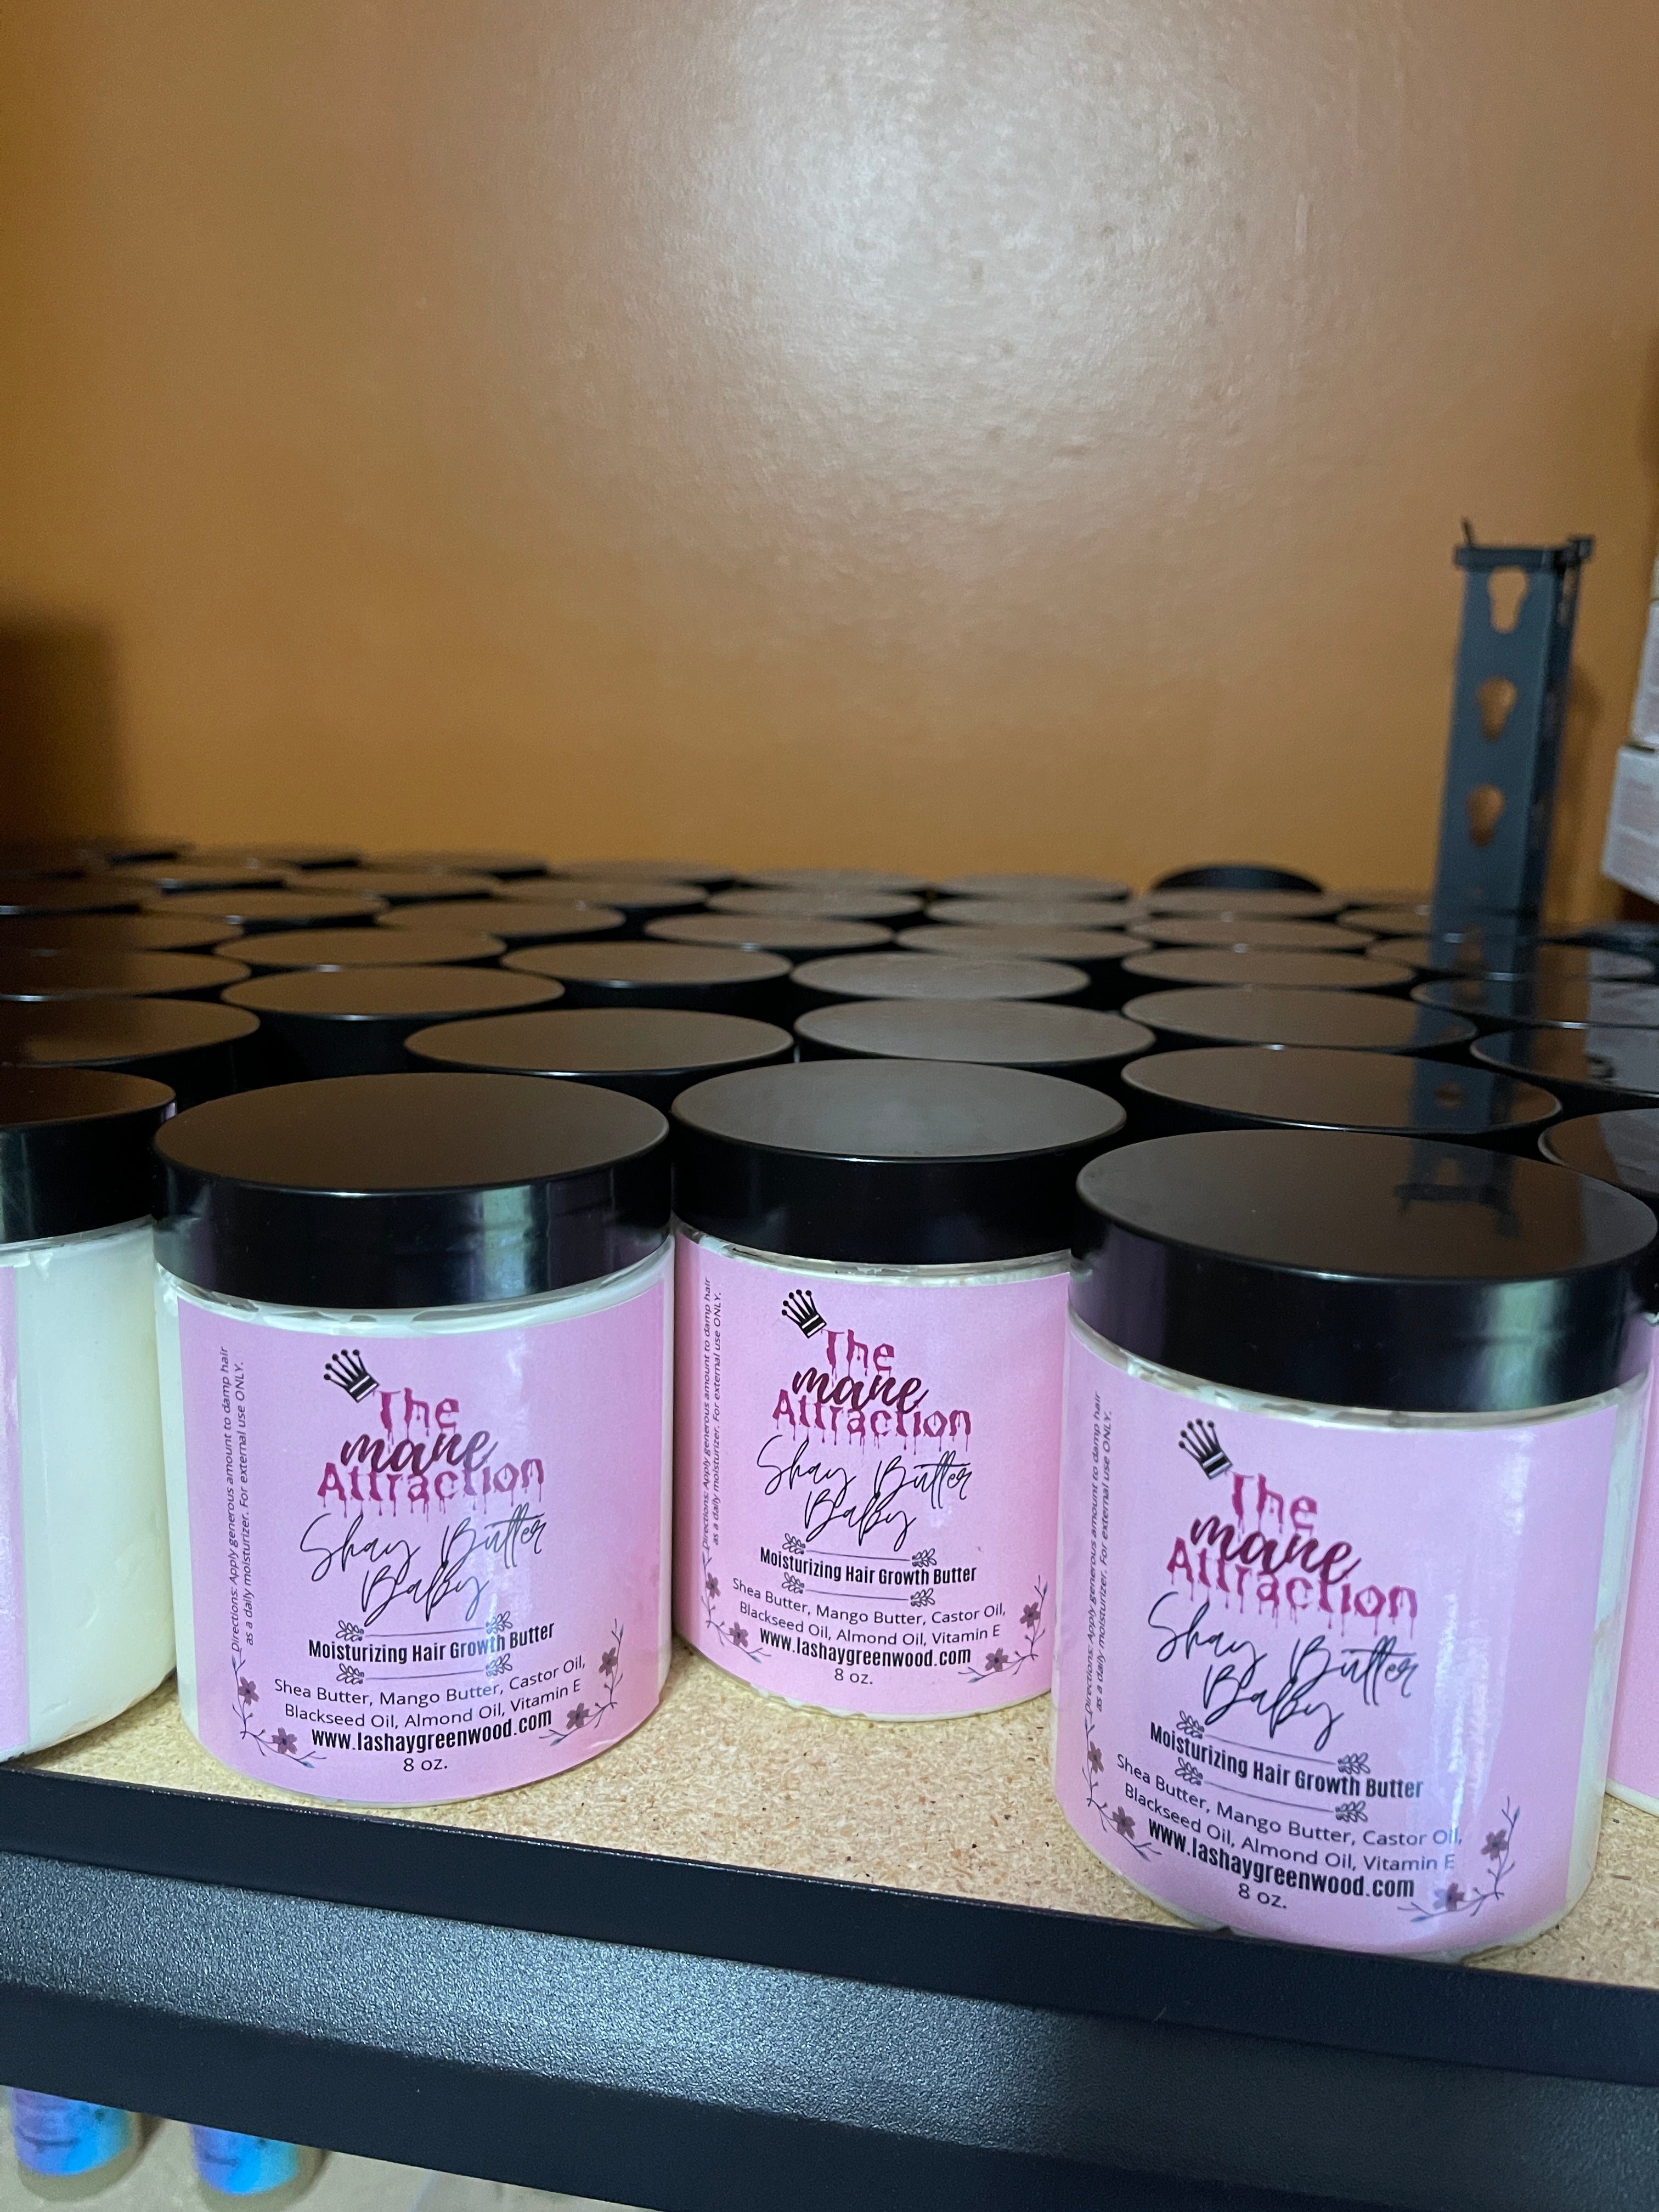 Wholesale Hair Growth Butter - The Mane Attraction